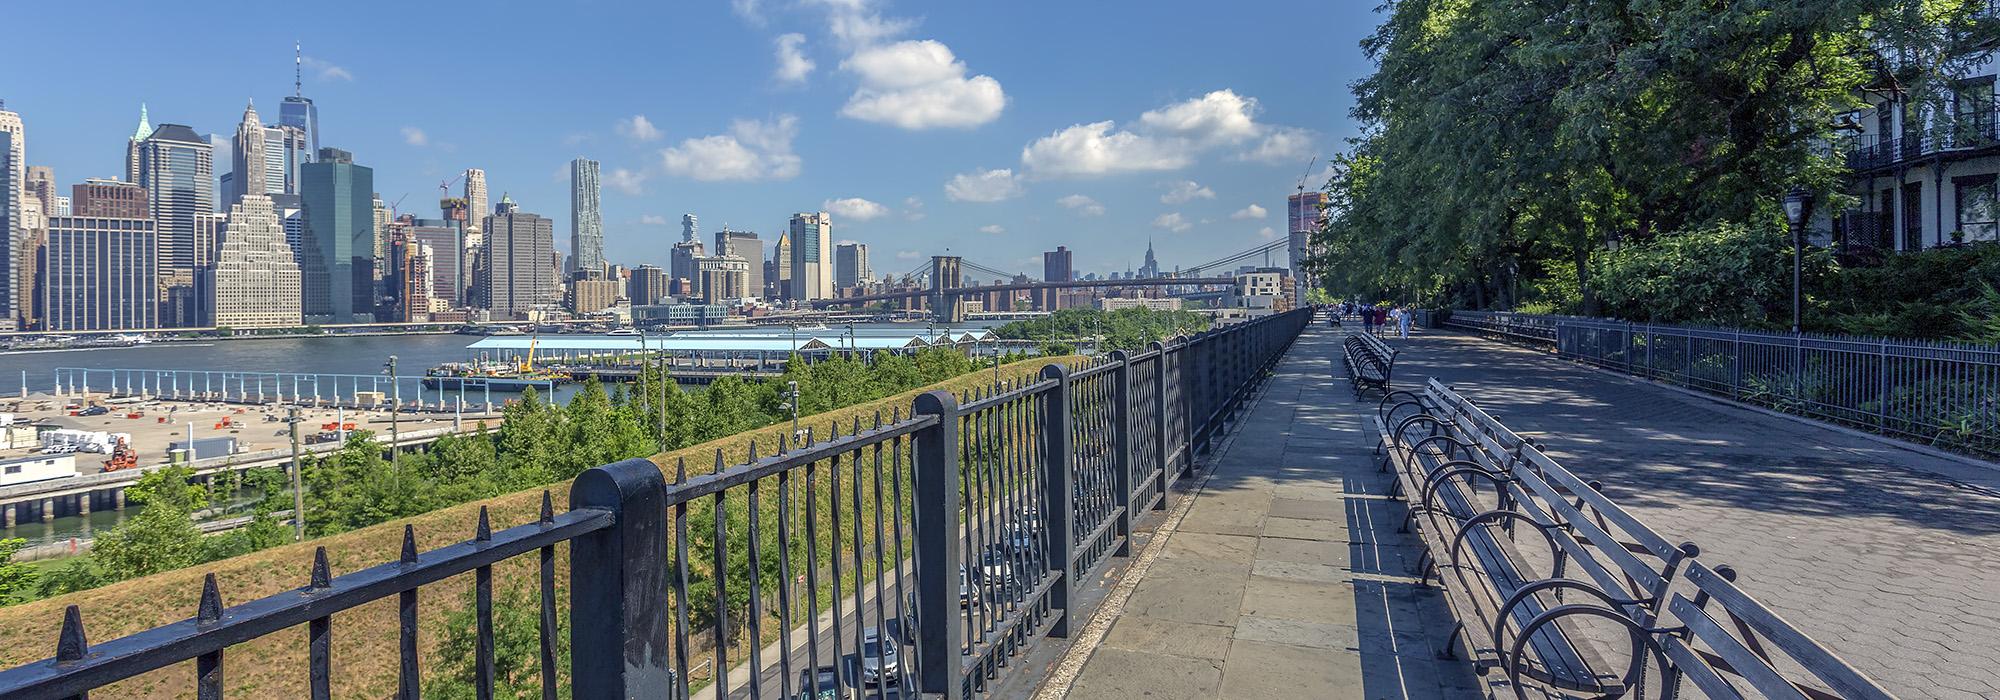 Expert Panel Advises: Spare Brooklyn Heights Promenade | The Cultural  Landscape Foundation